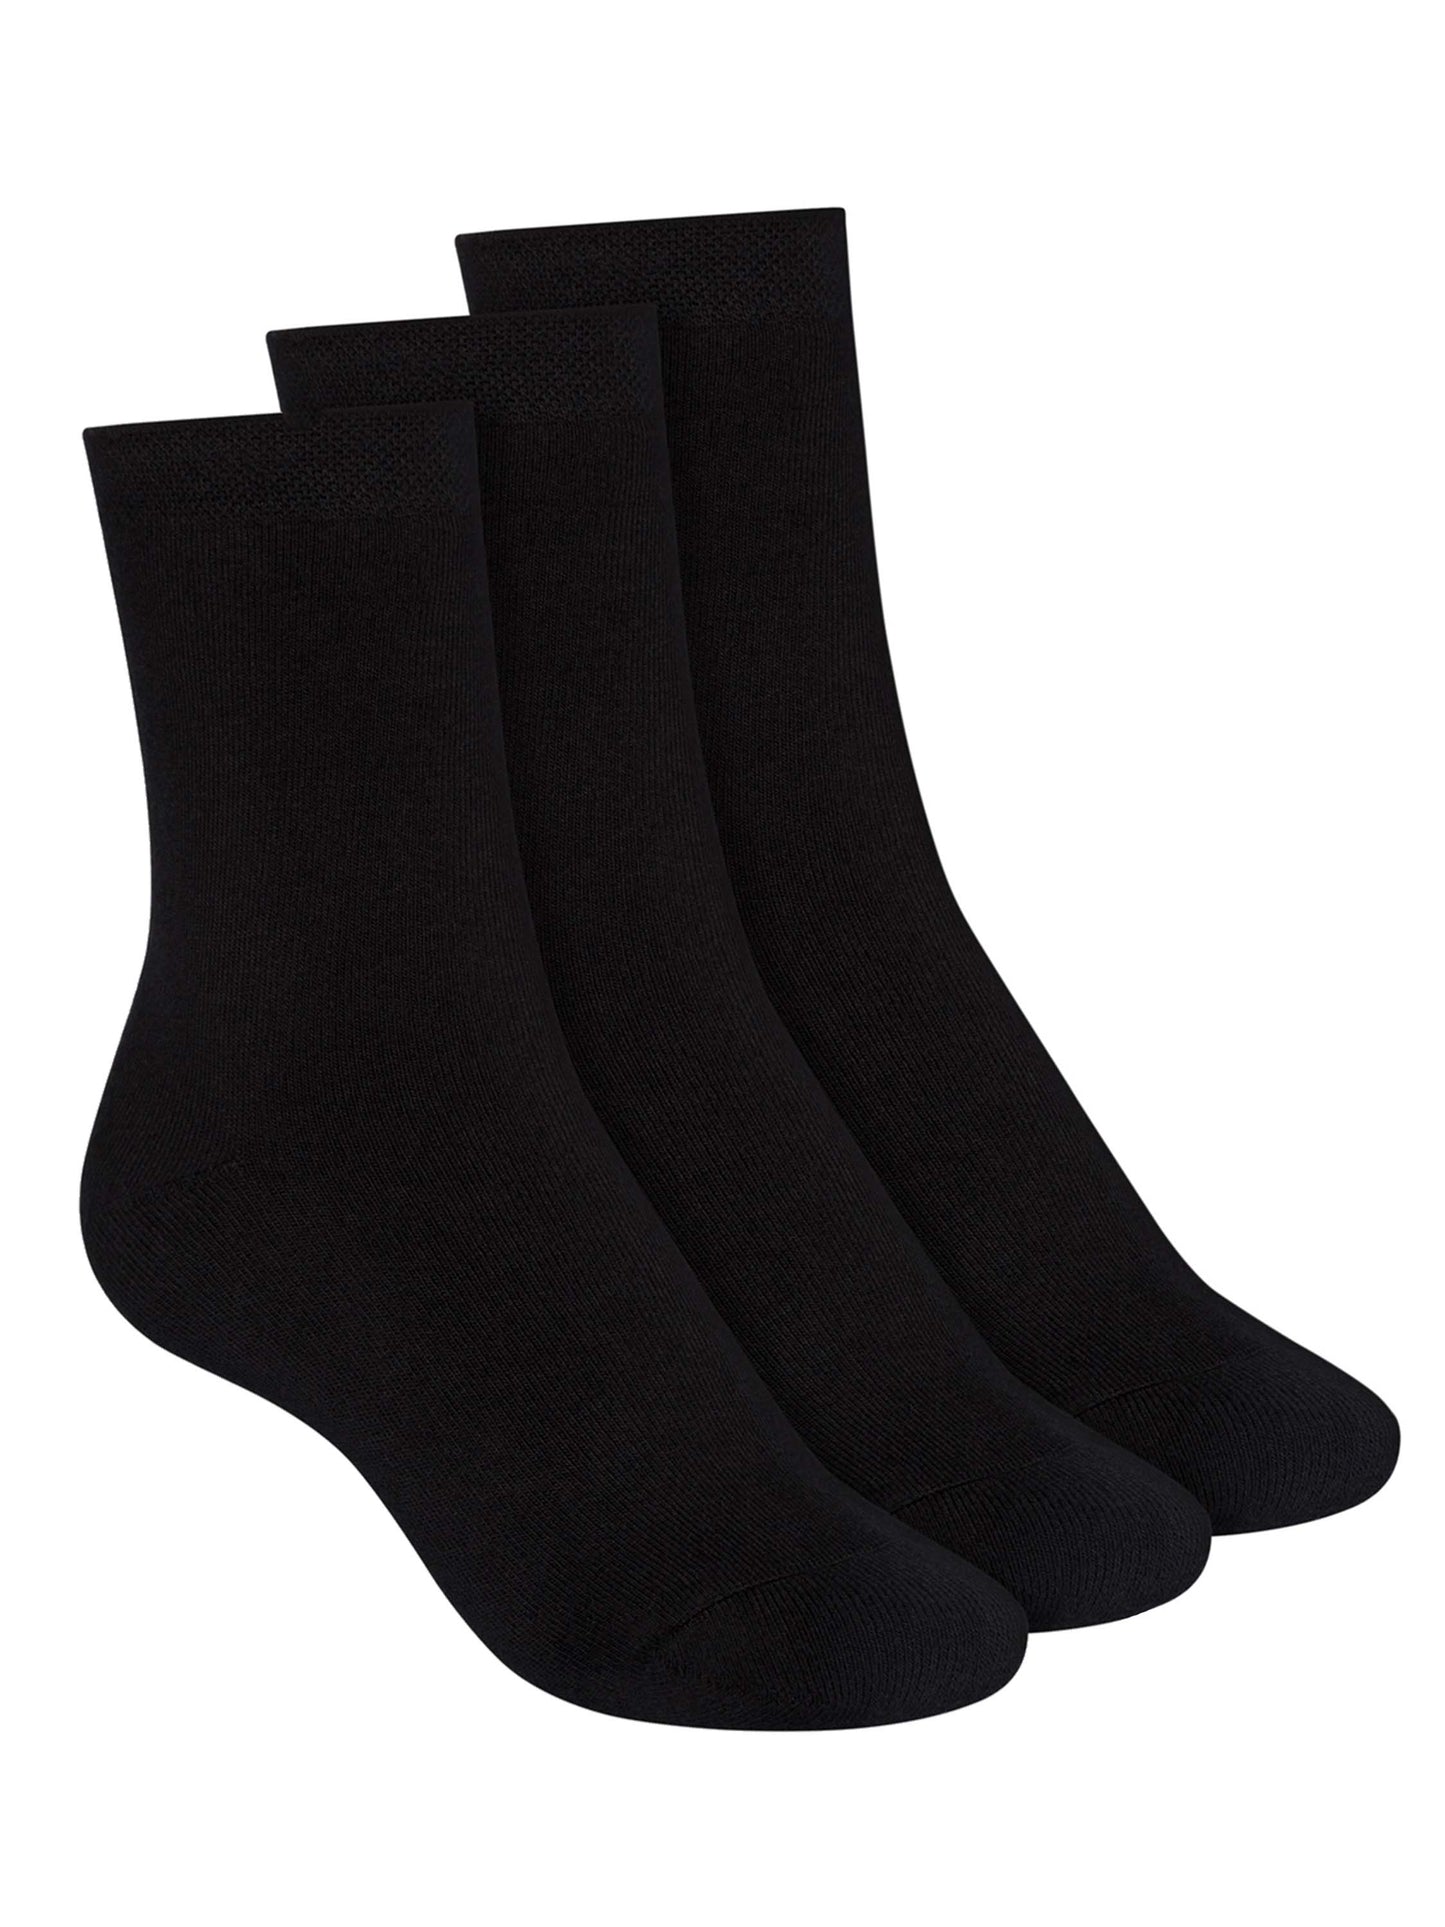 Pack of 3 socks with organic cotton black